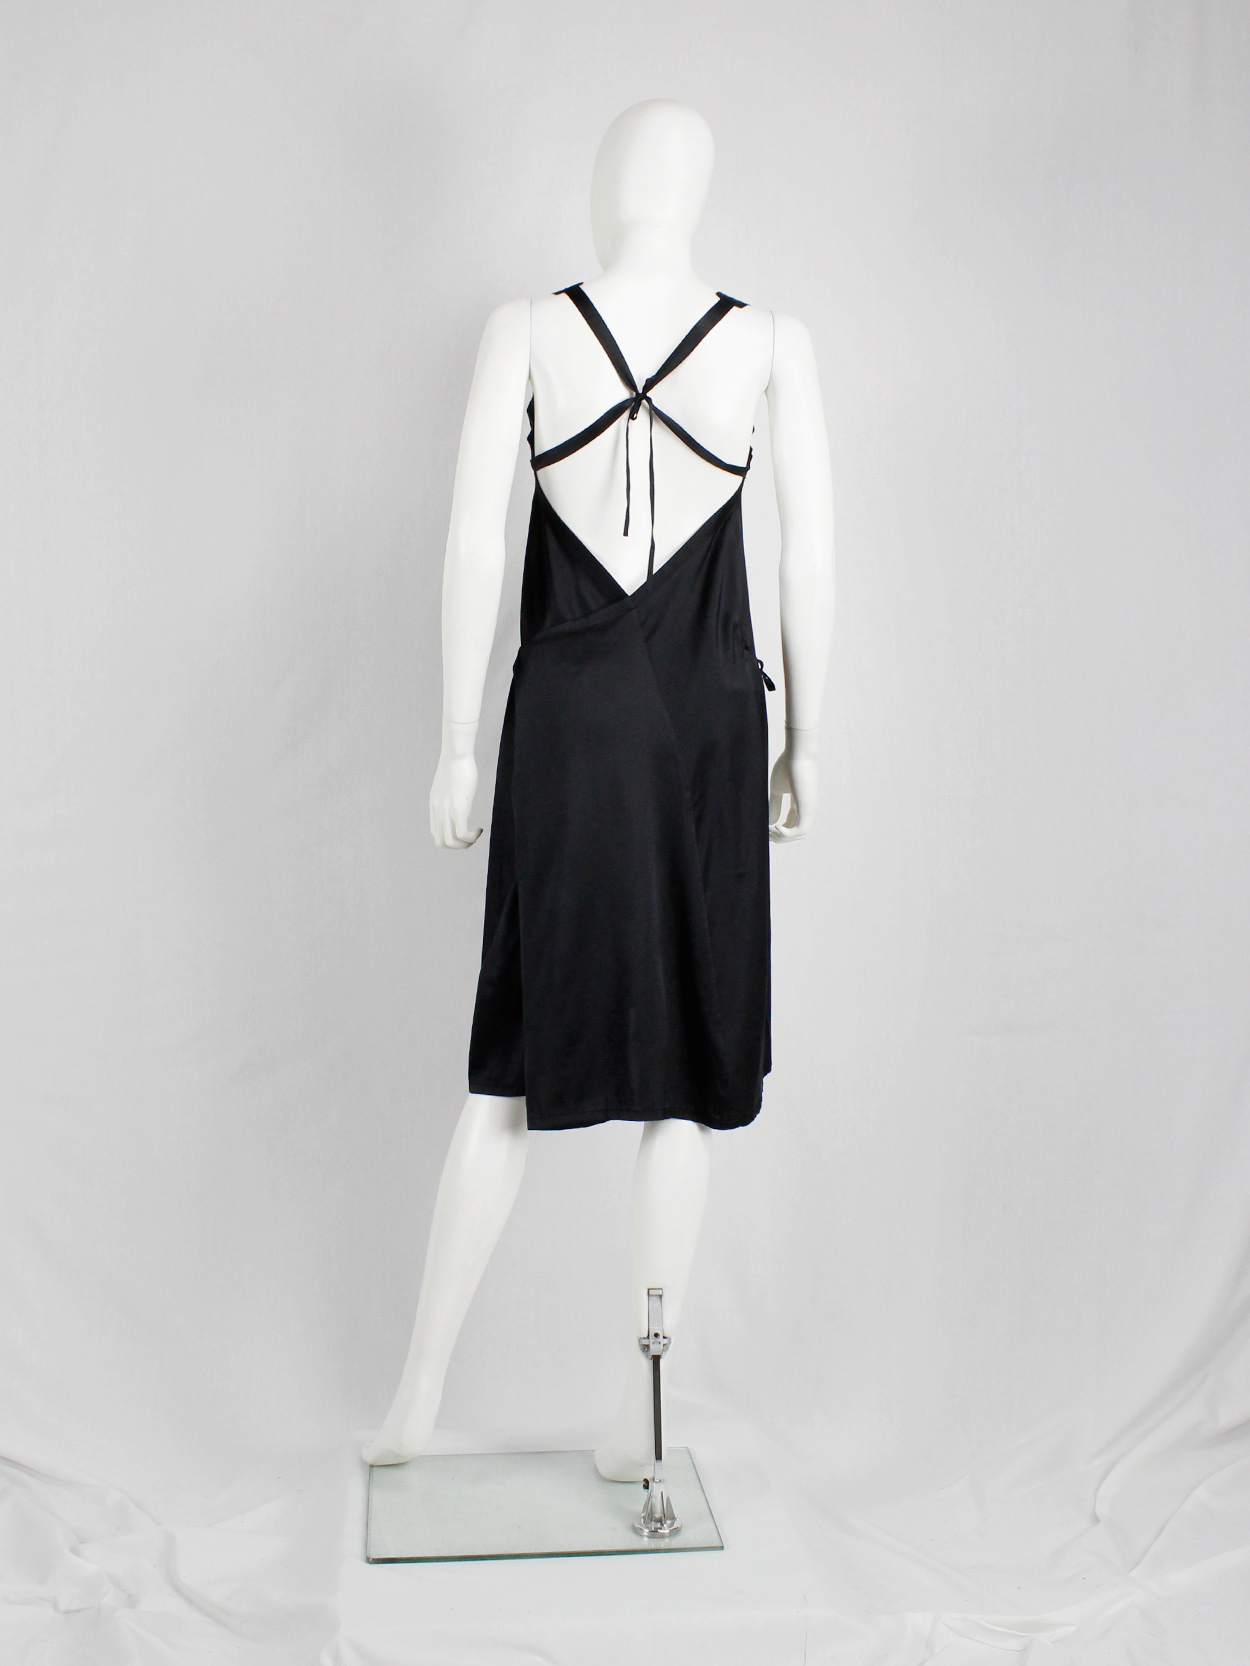 Ann Demeulemeester black dress with open back and tied straps spring 2003 (4)